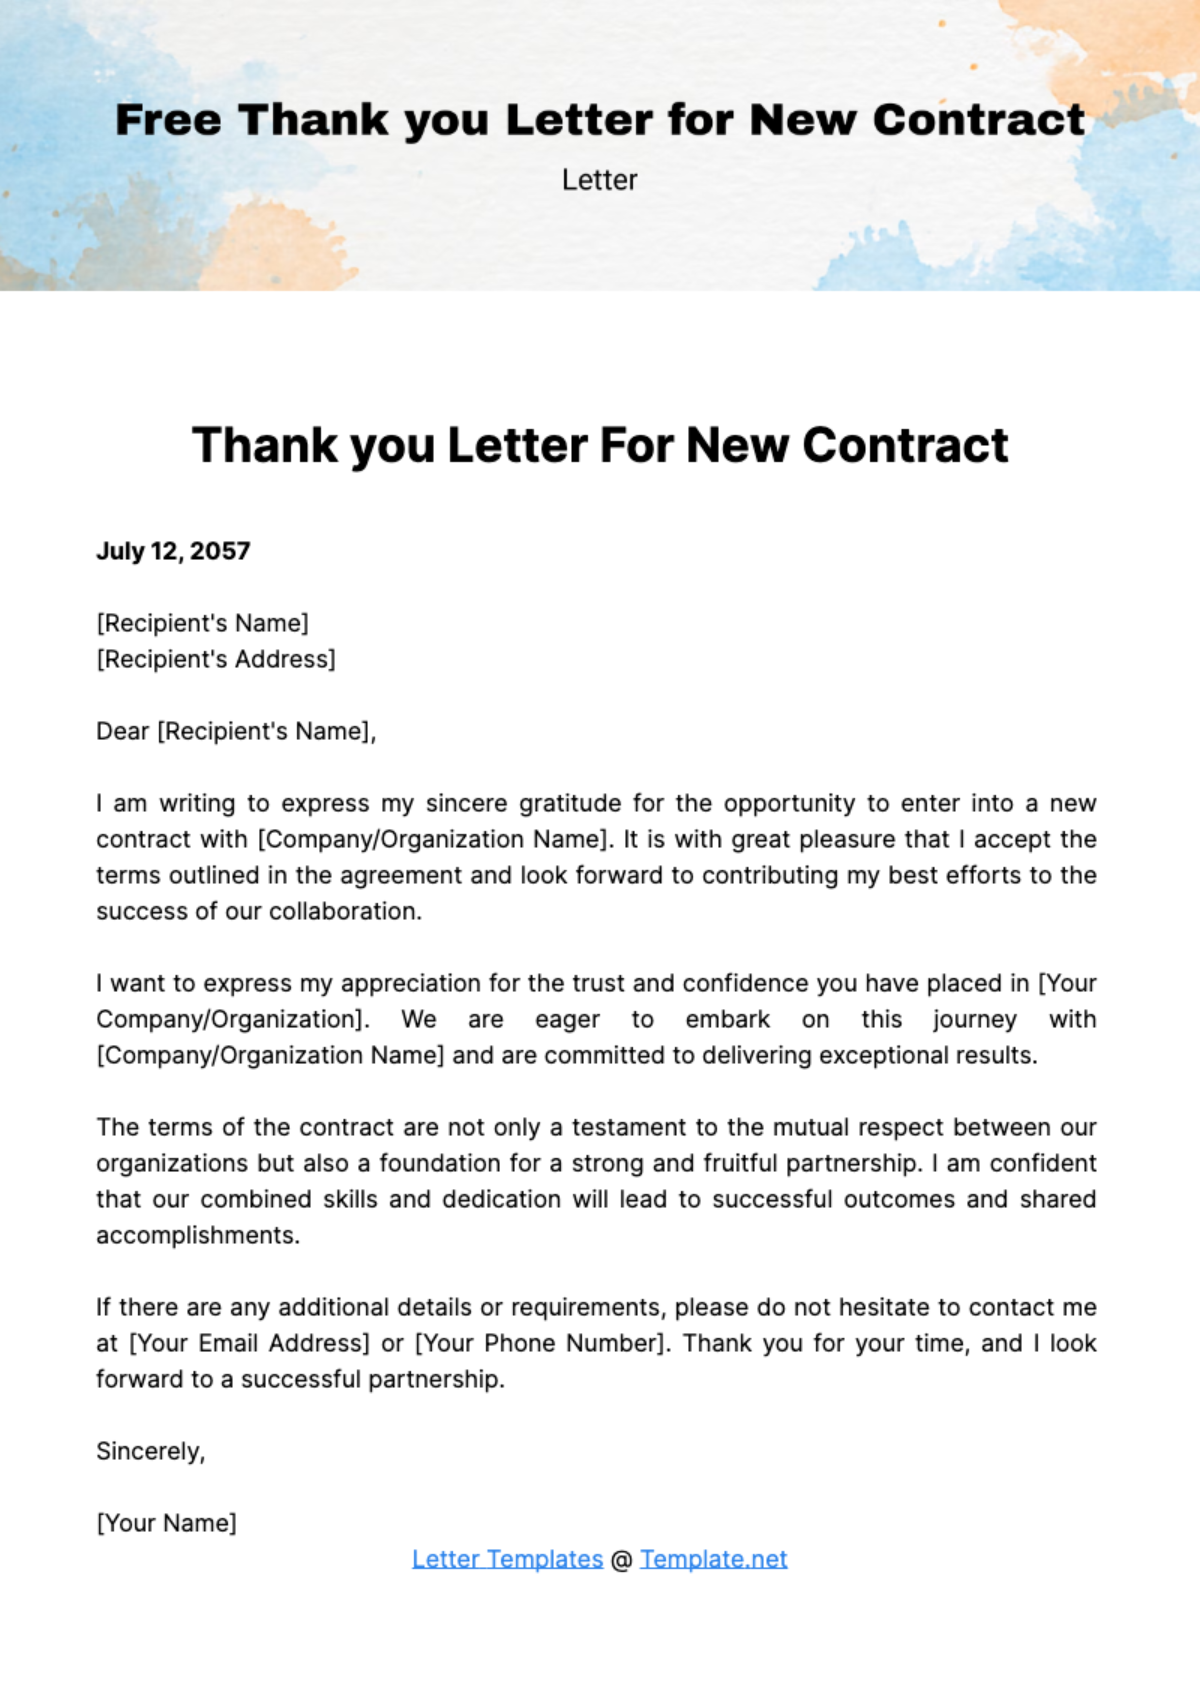 Free Thank you Letter for New Contract Template